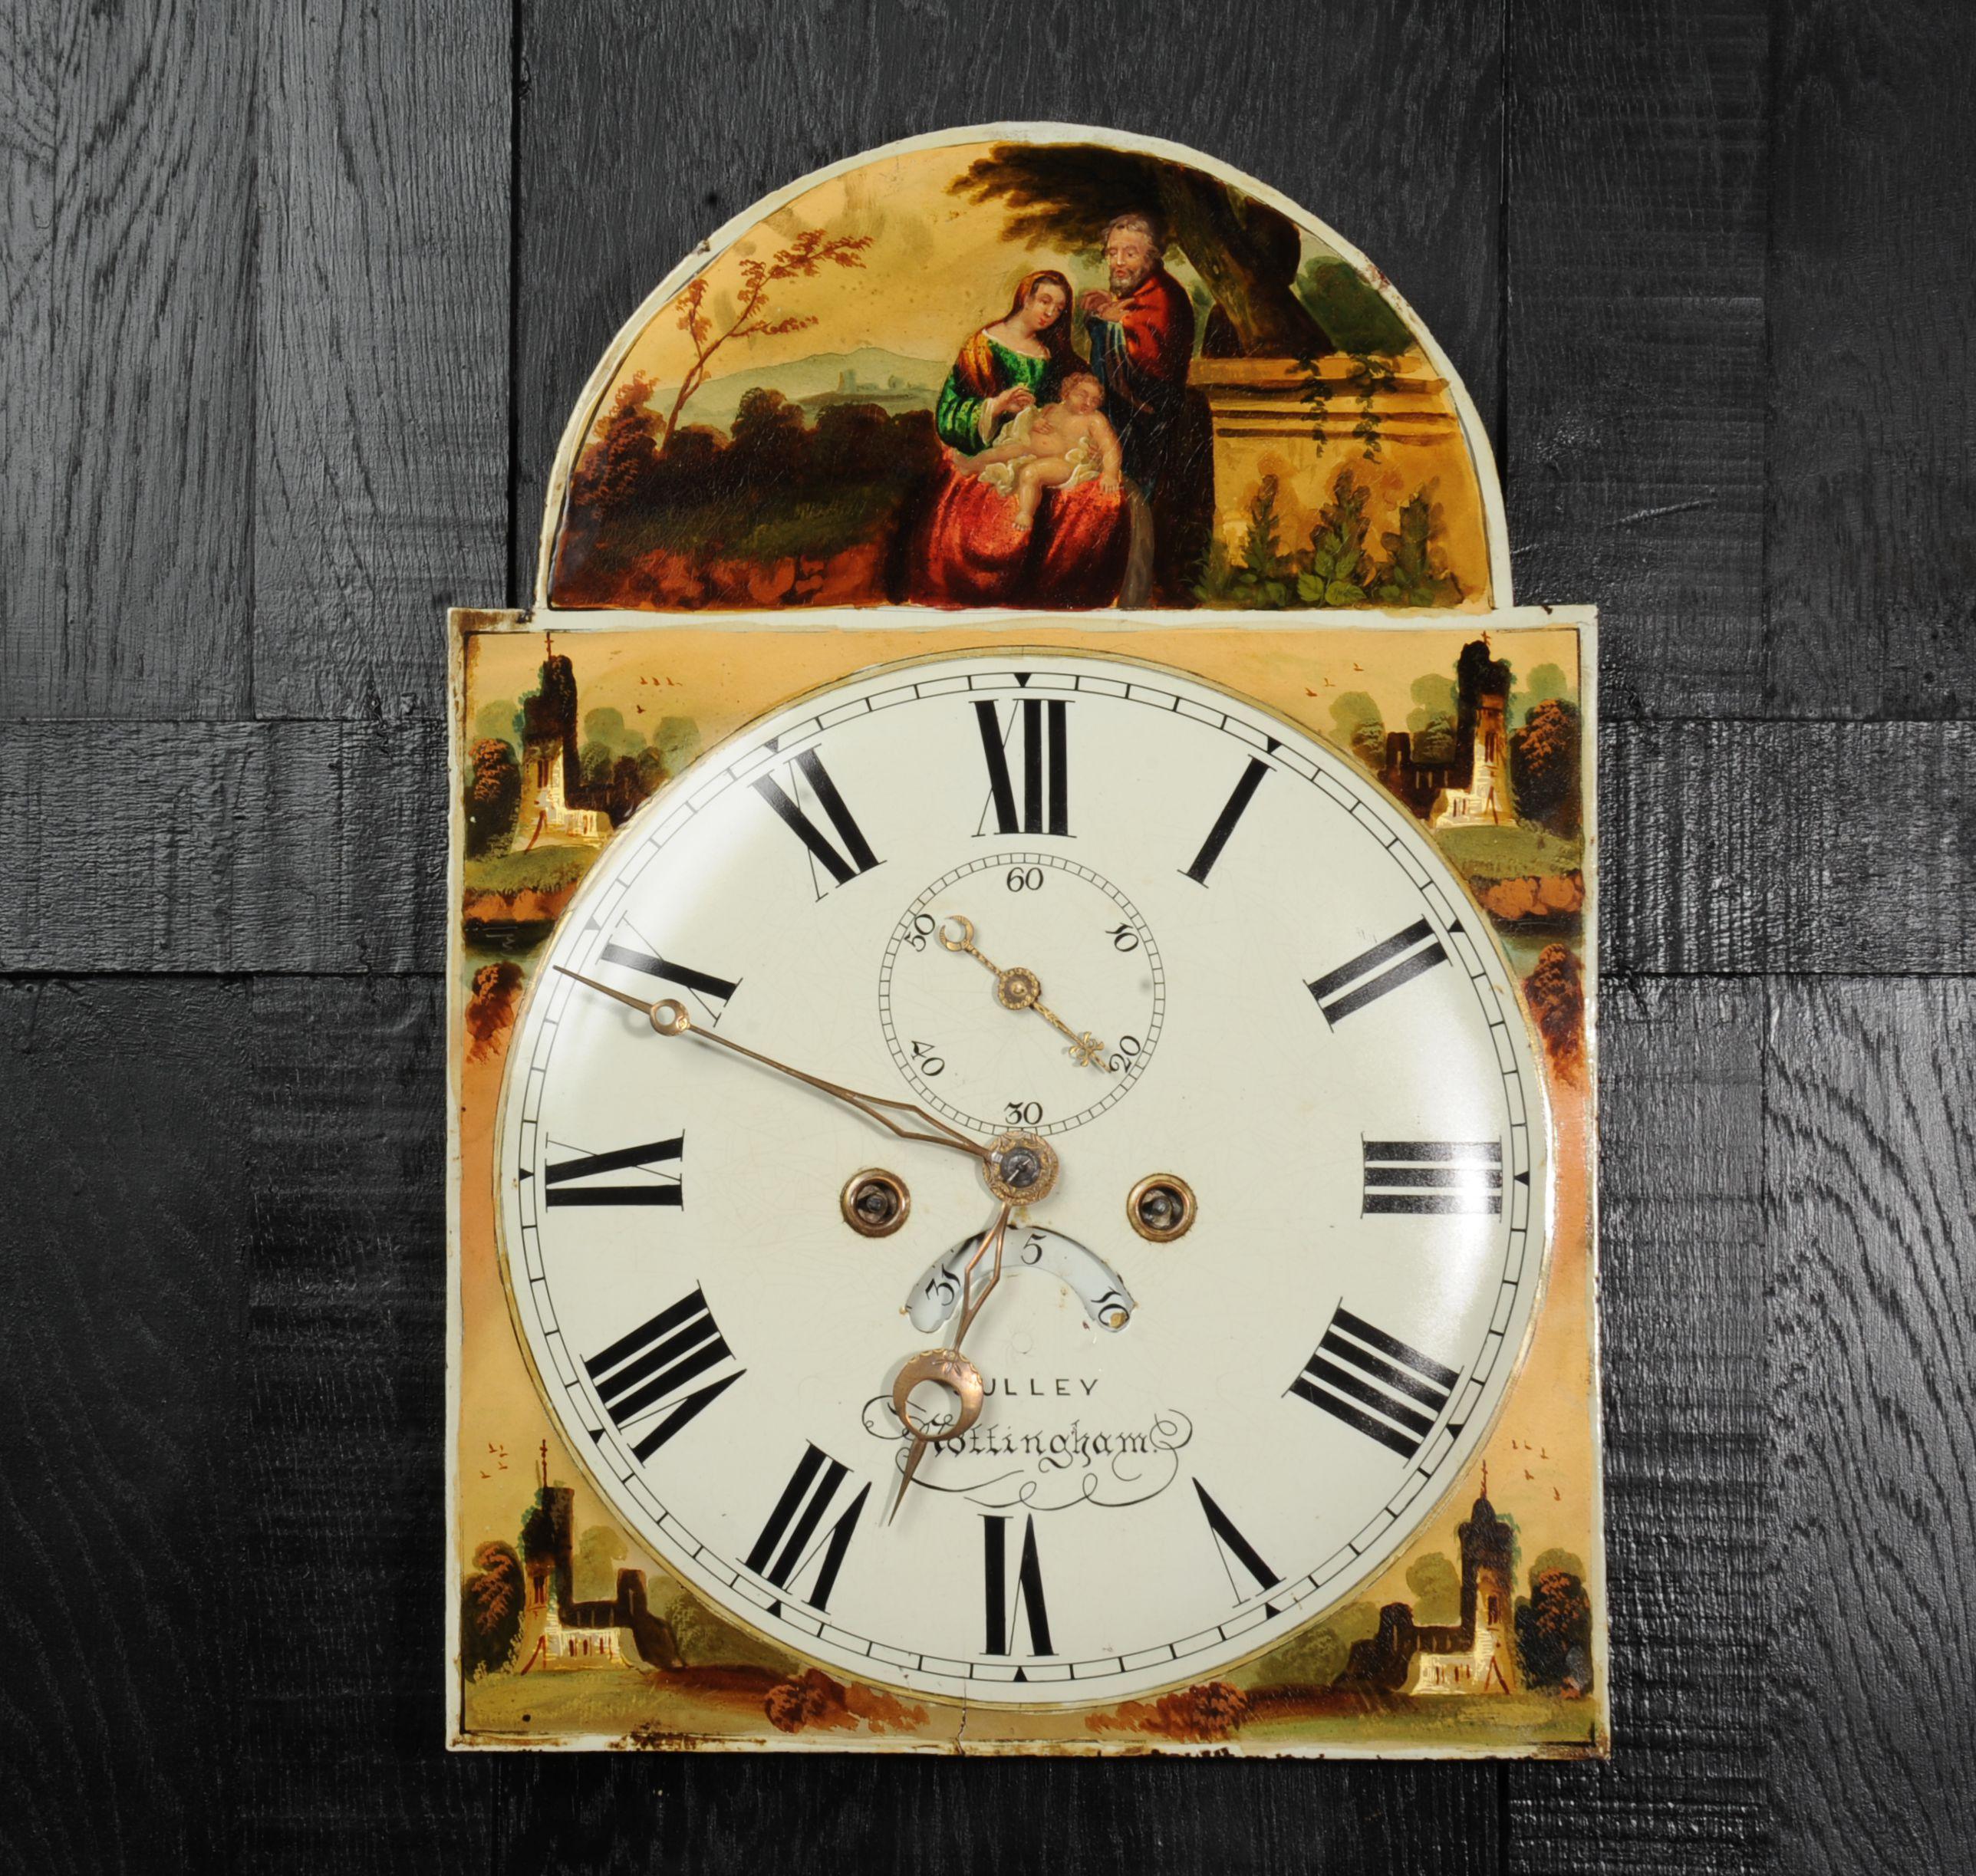 A Rare and lovely antique iron clock dial dating from around 1850. It features a charming painting of the Holy Family, Jesus, Mary and Joseph to the arch. Beautifully painted in the vibrant colours heightened with gold. The spandrels feature